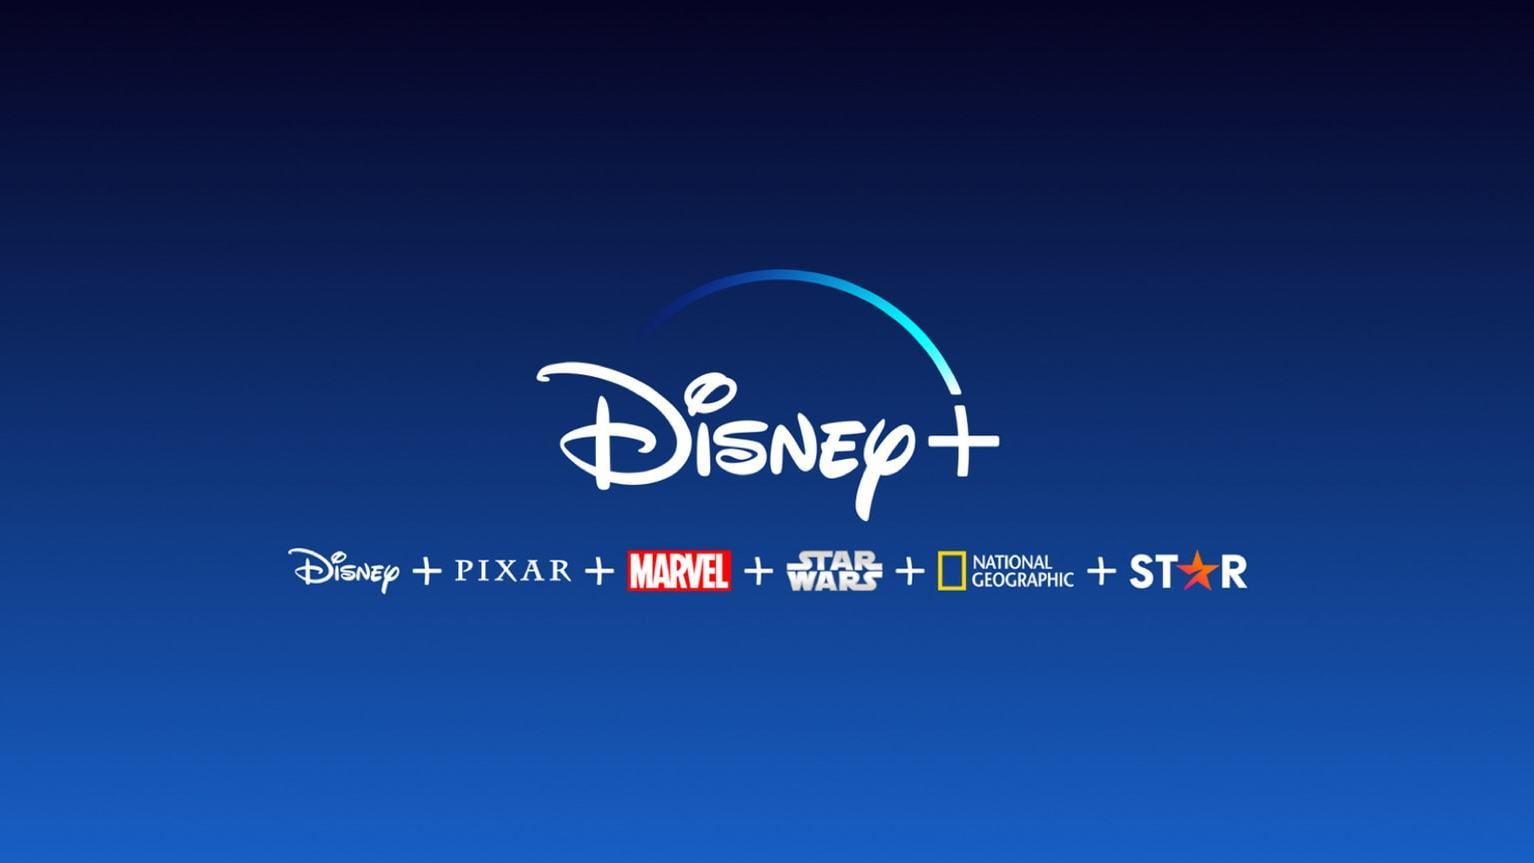 DISNEY+ DEBUTS TRAILER & ANNOUNCES CAST FOR “STAR WARS: VISIONS”